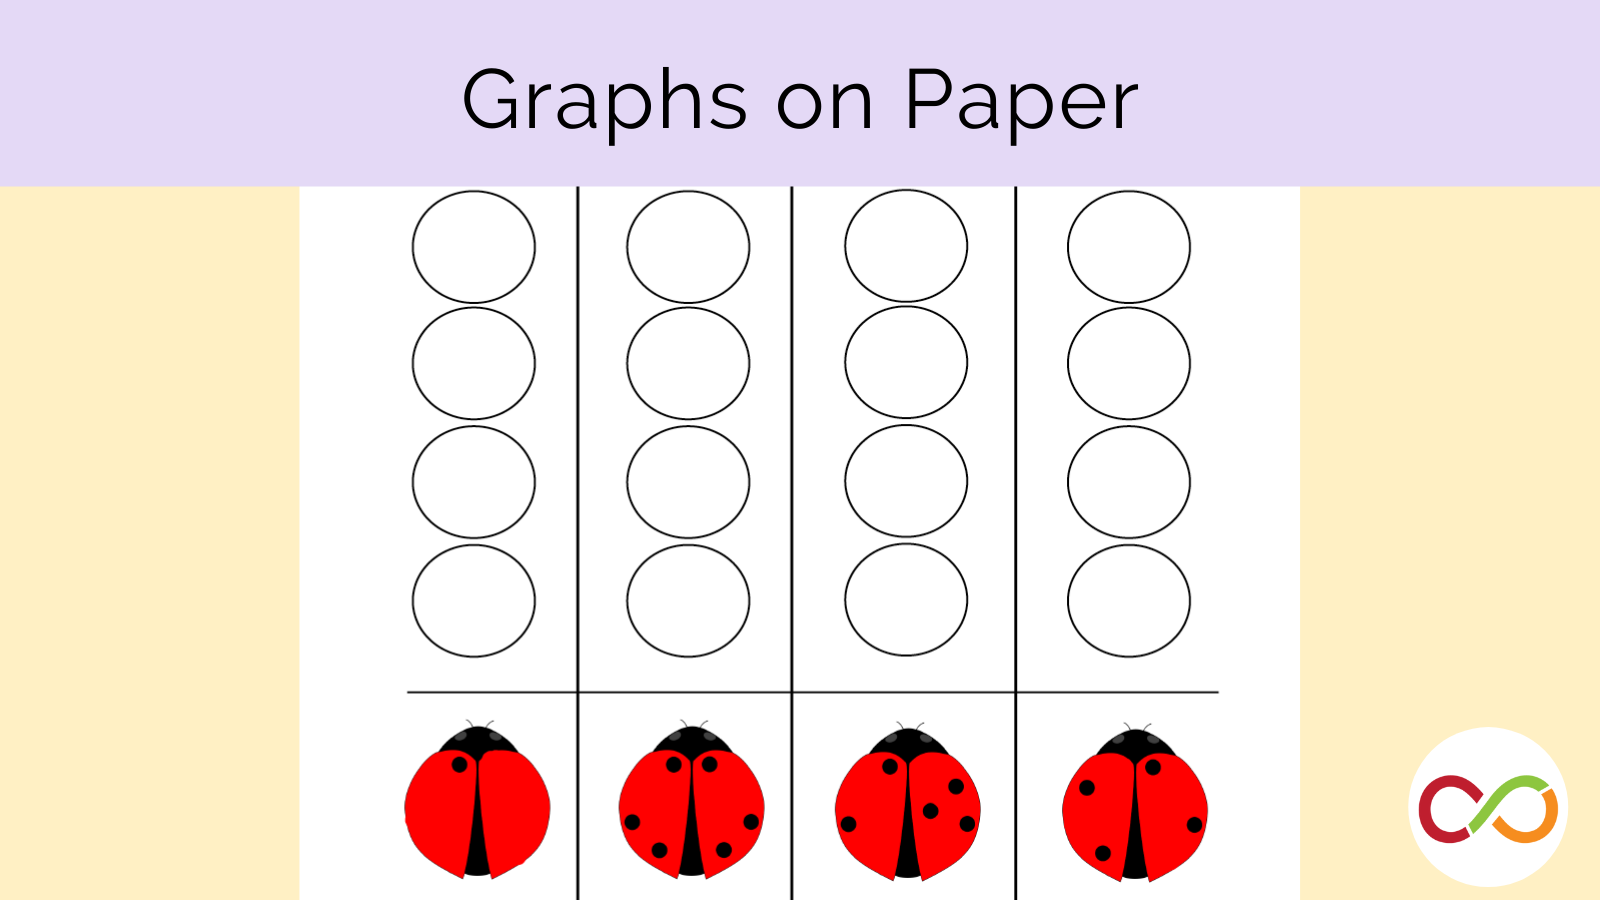 An image linking to the graphs on paper lesson